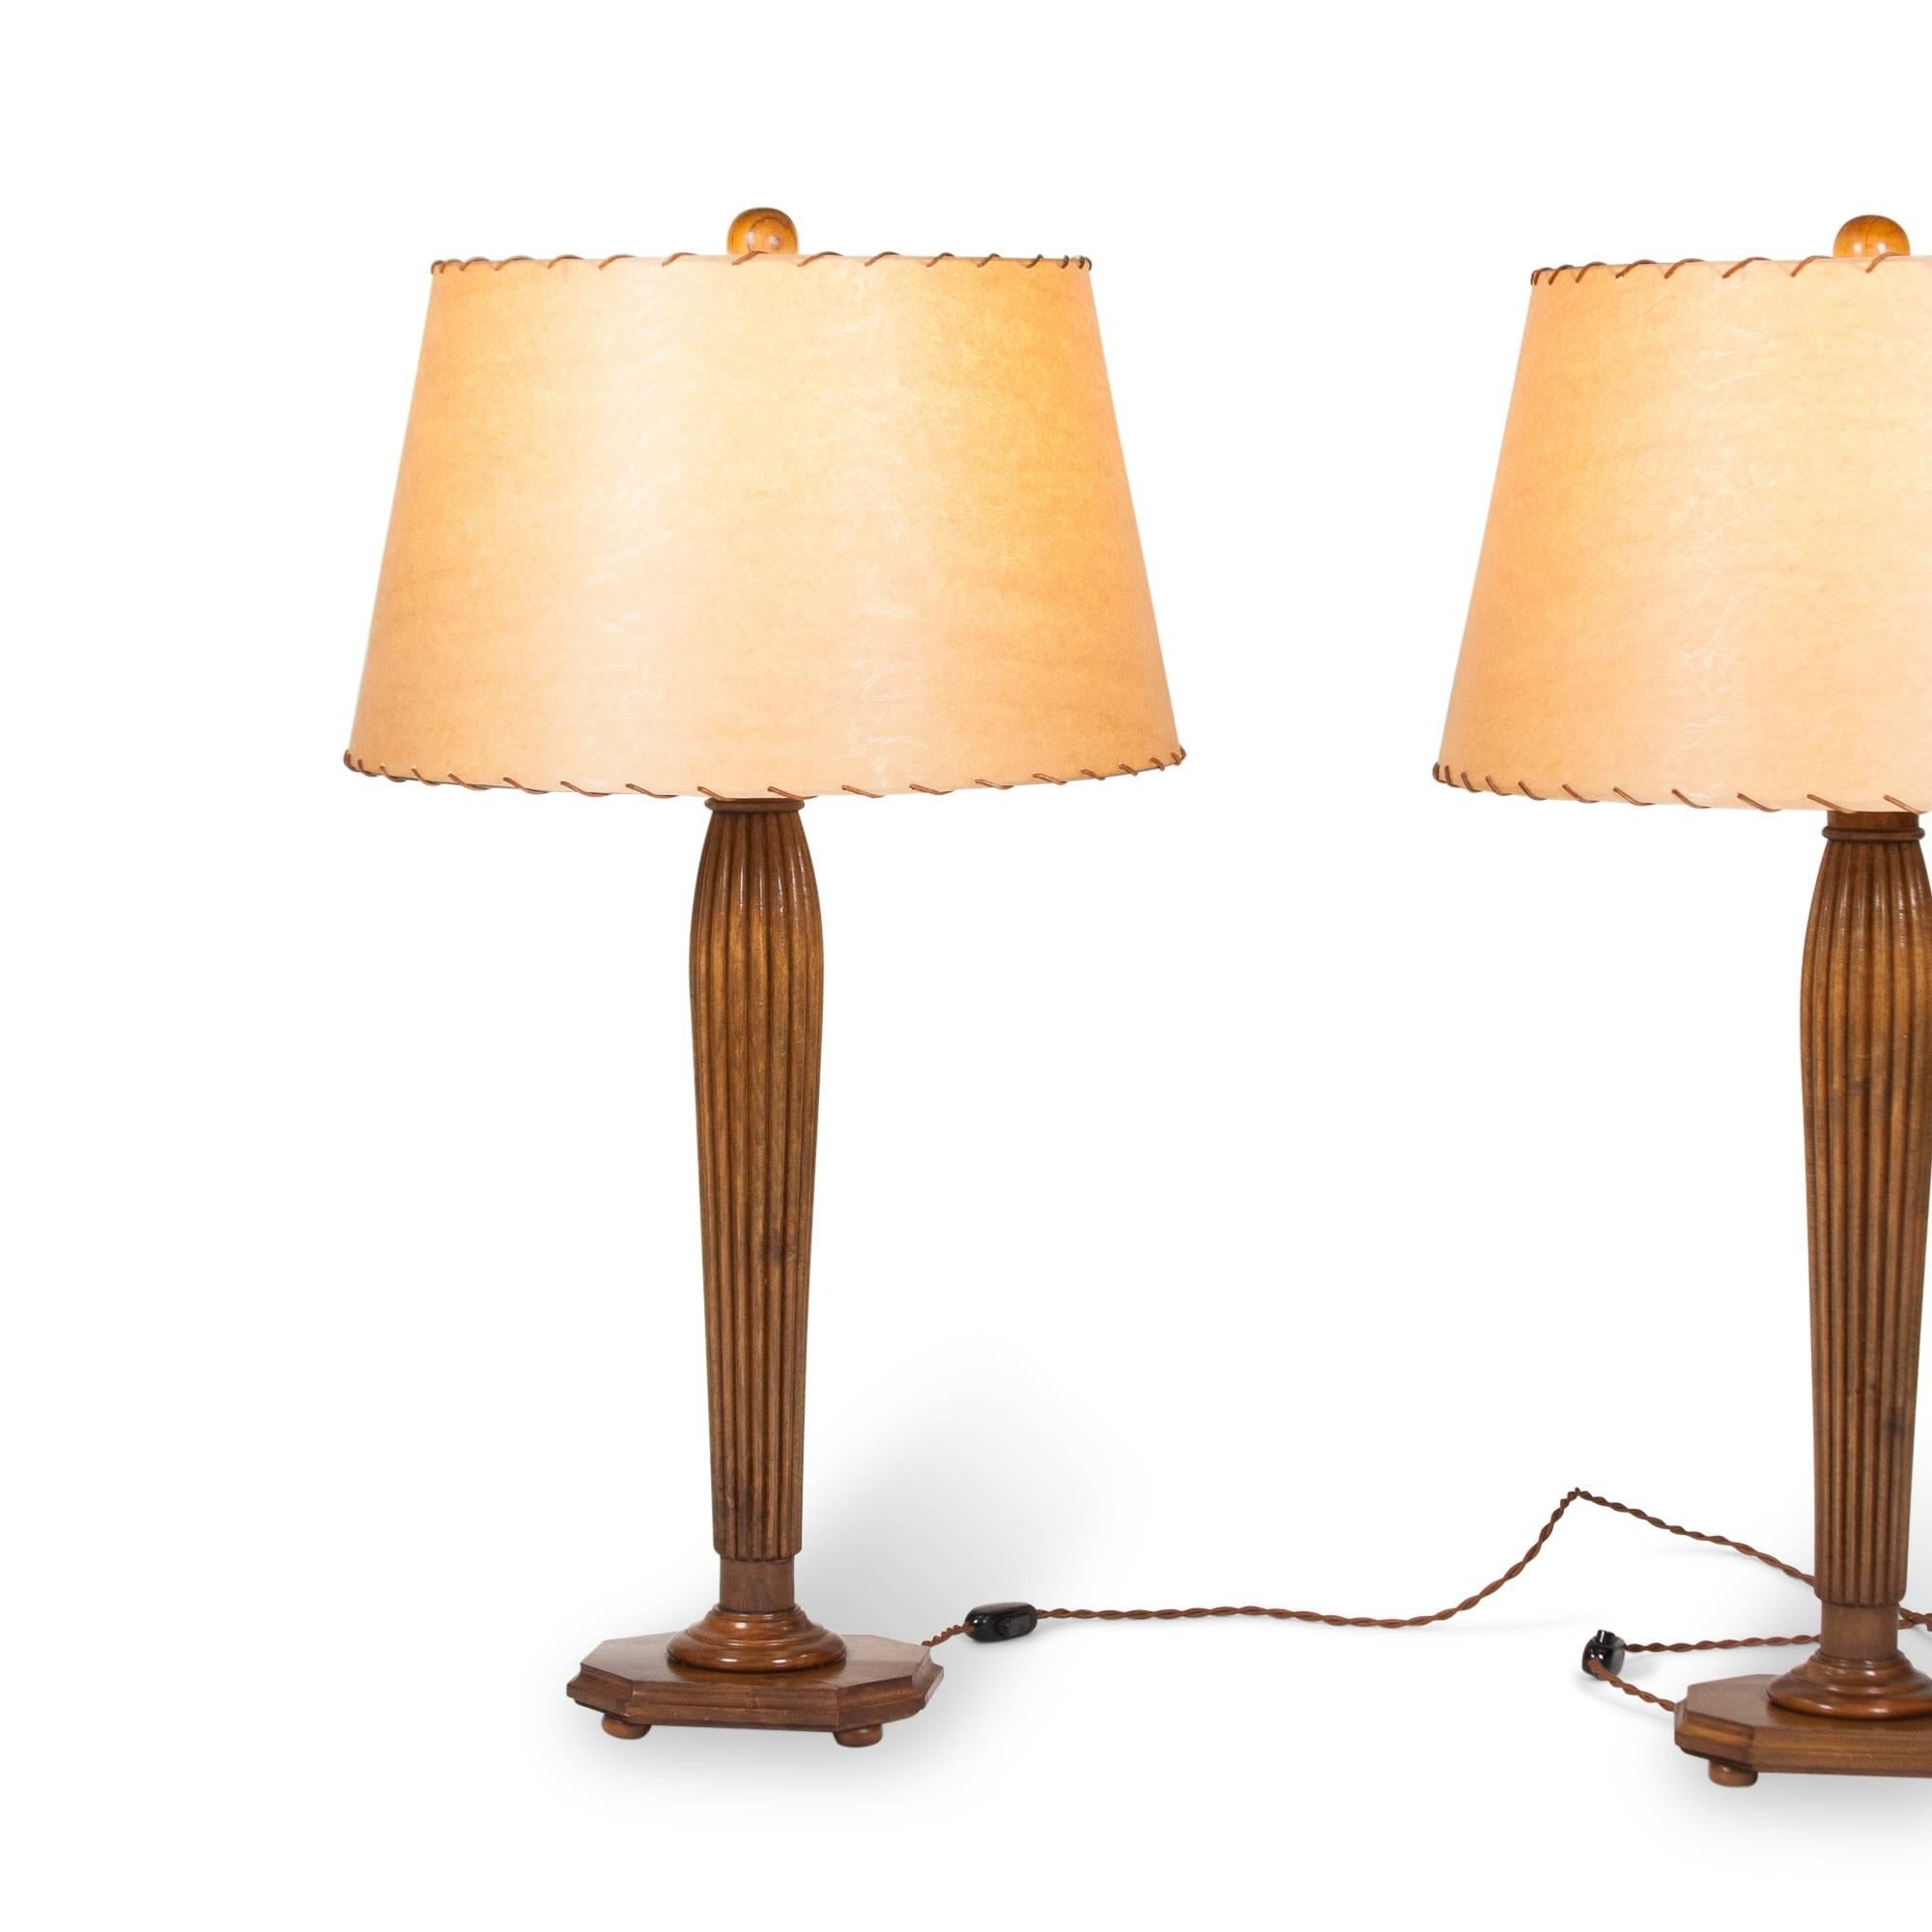 Pair of fluted and tapered column fruitwood table lamps, the column resting on rectangular base with ball feet, in custom stitched parchment paper shades and having wood ball finial, Italian 1960s. With paper label to underside from Rome gallery.